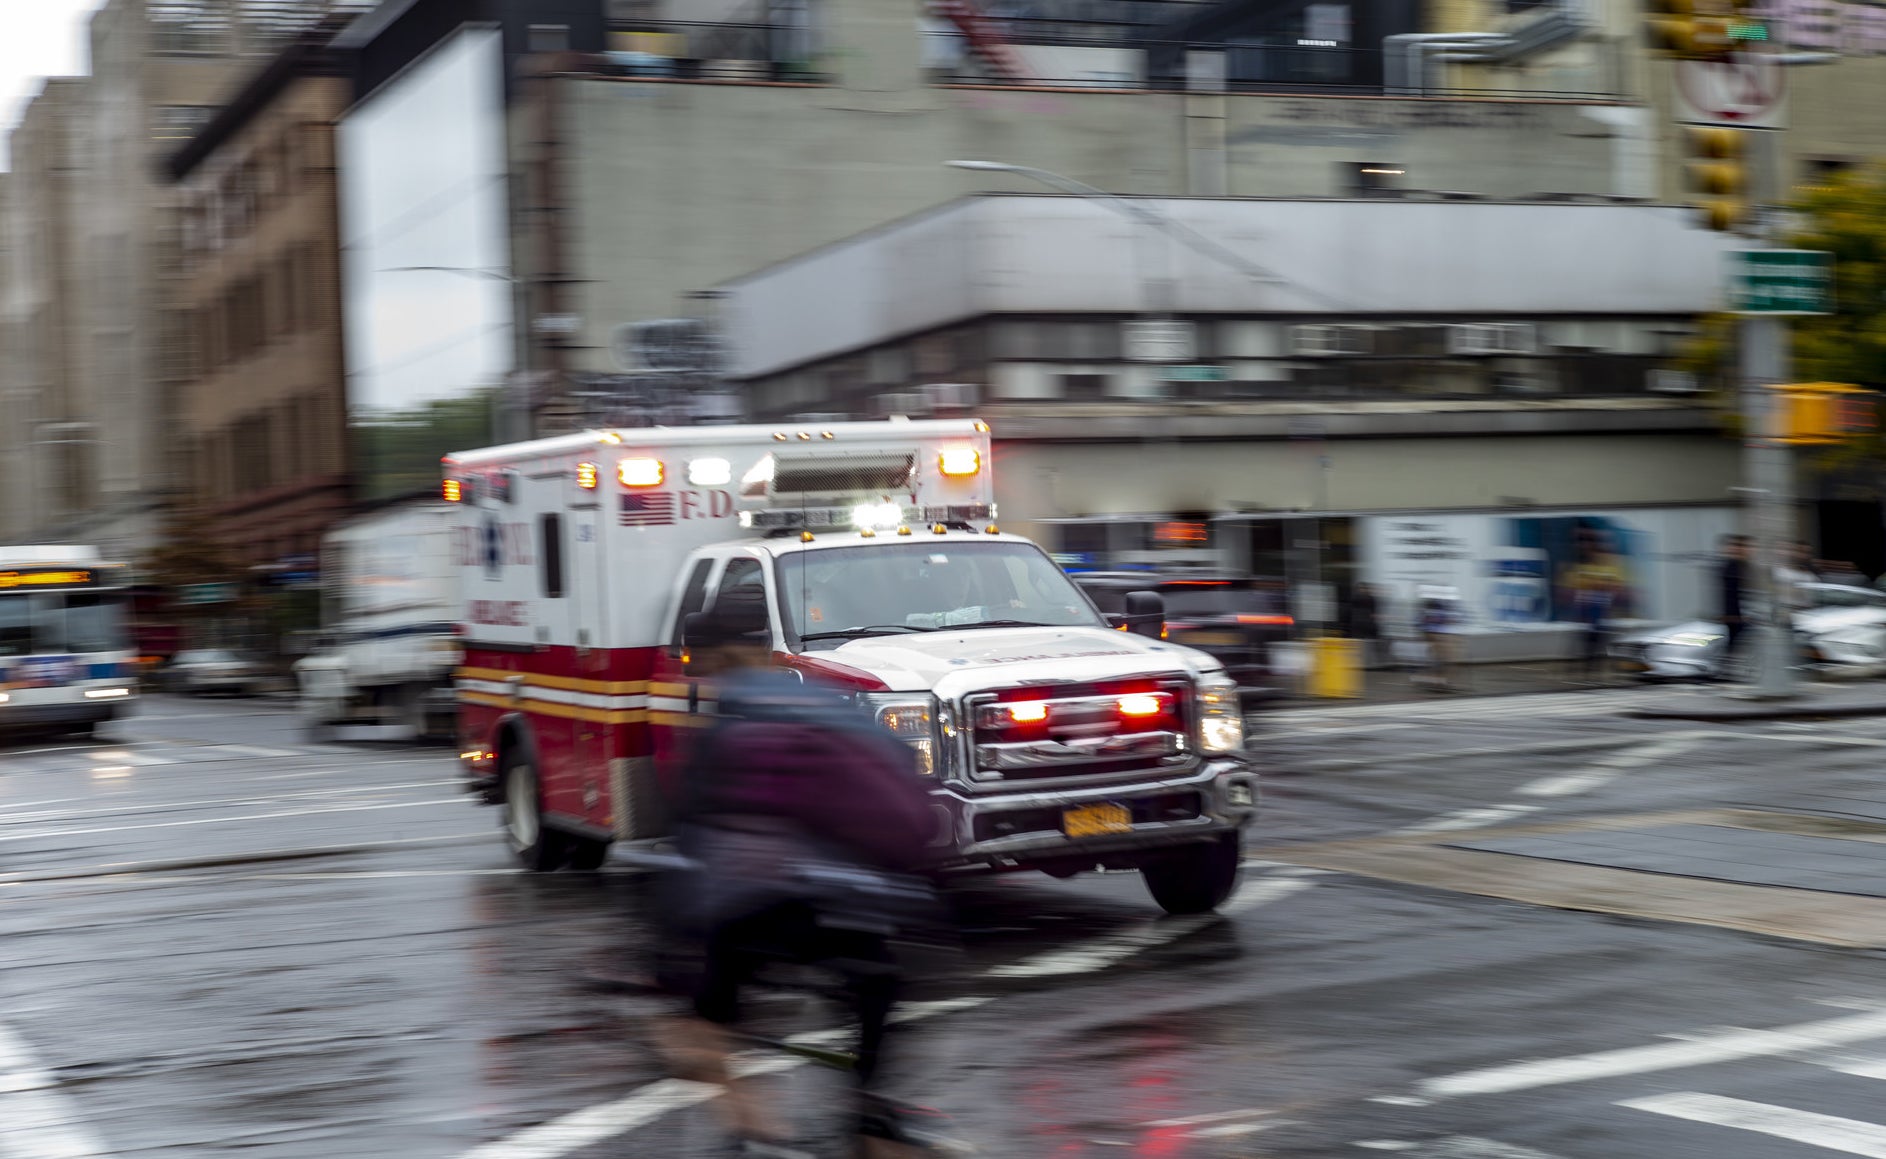 Ambulance driving through the city with its emergency lights on